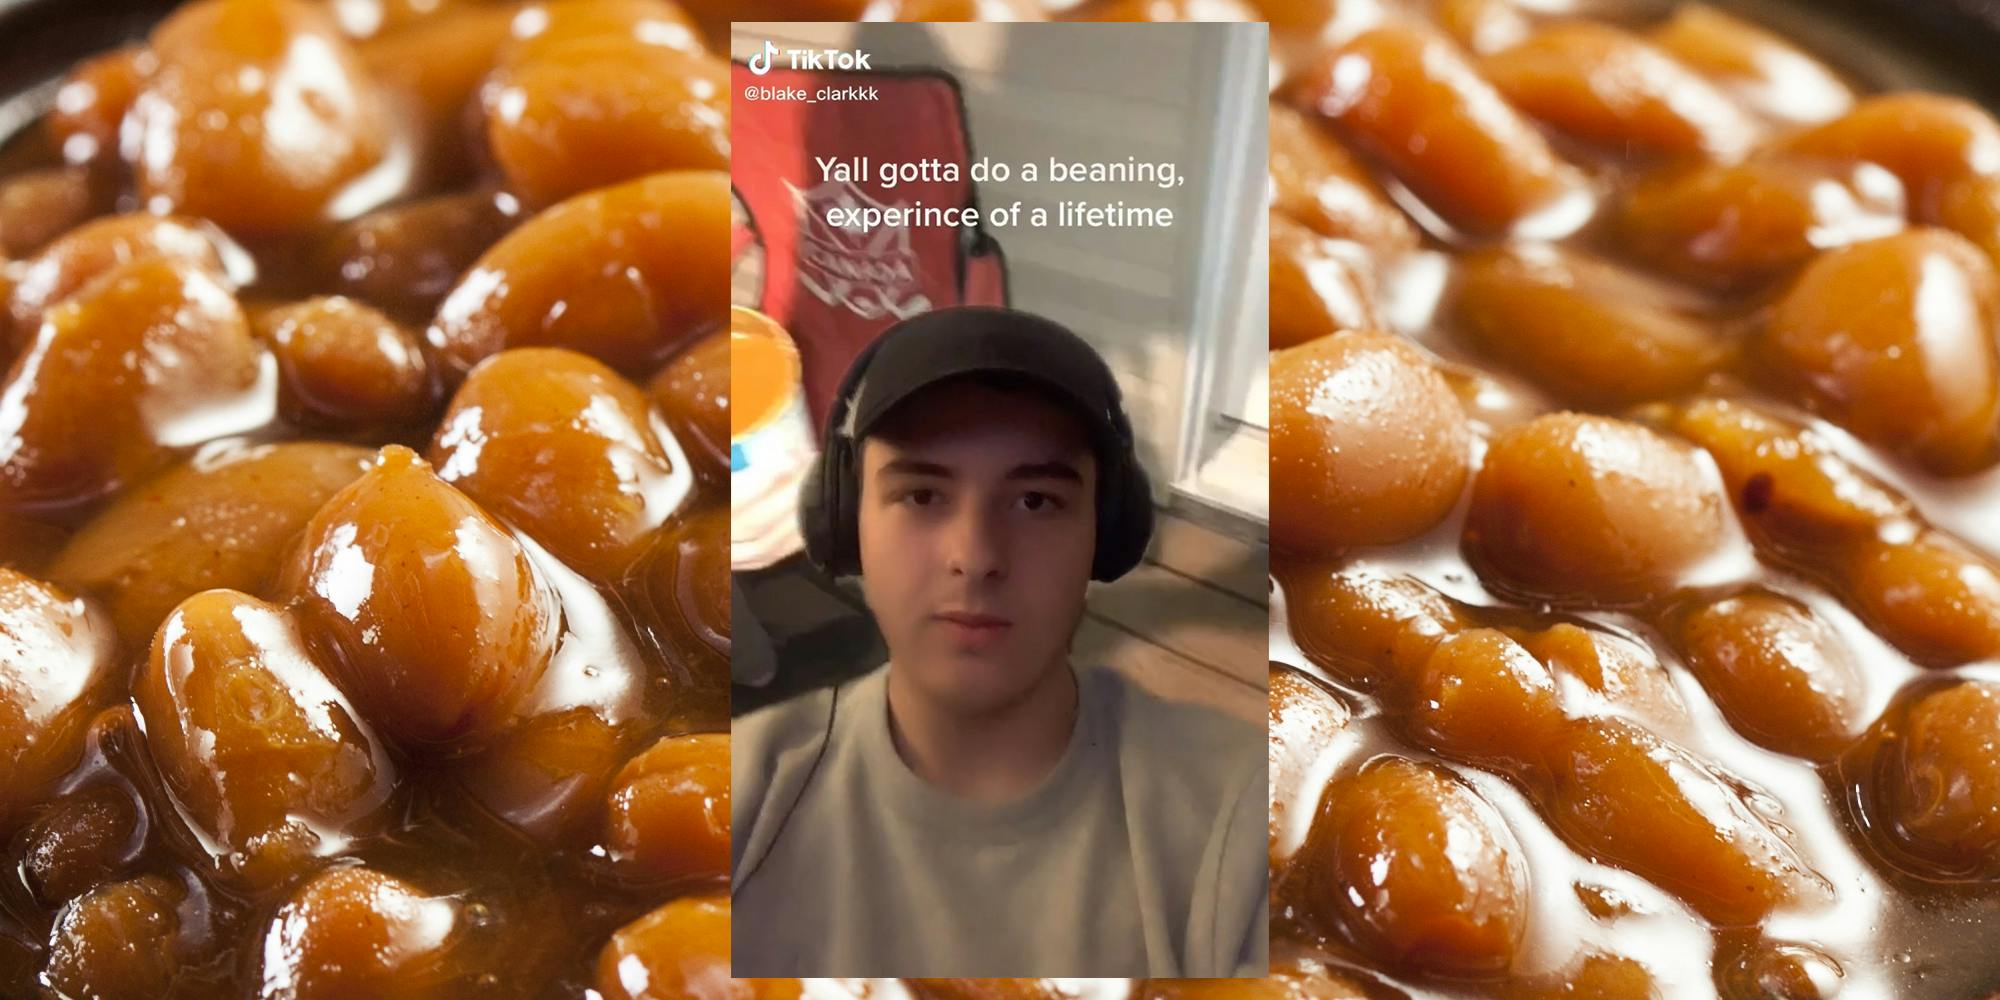 young man wearing hat and headphones with caption "Yall gotta do a beaning, experince of a lifetime" (inset) baked beans